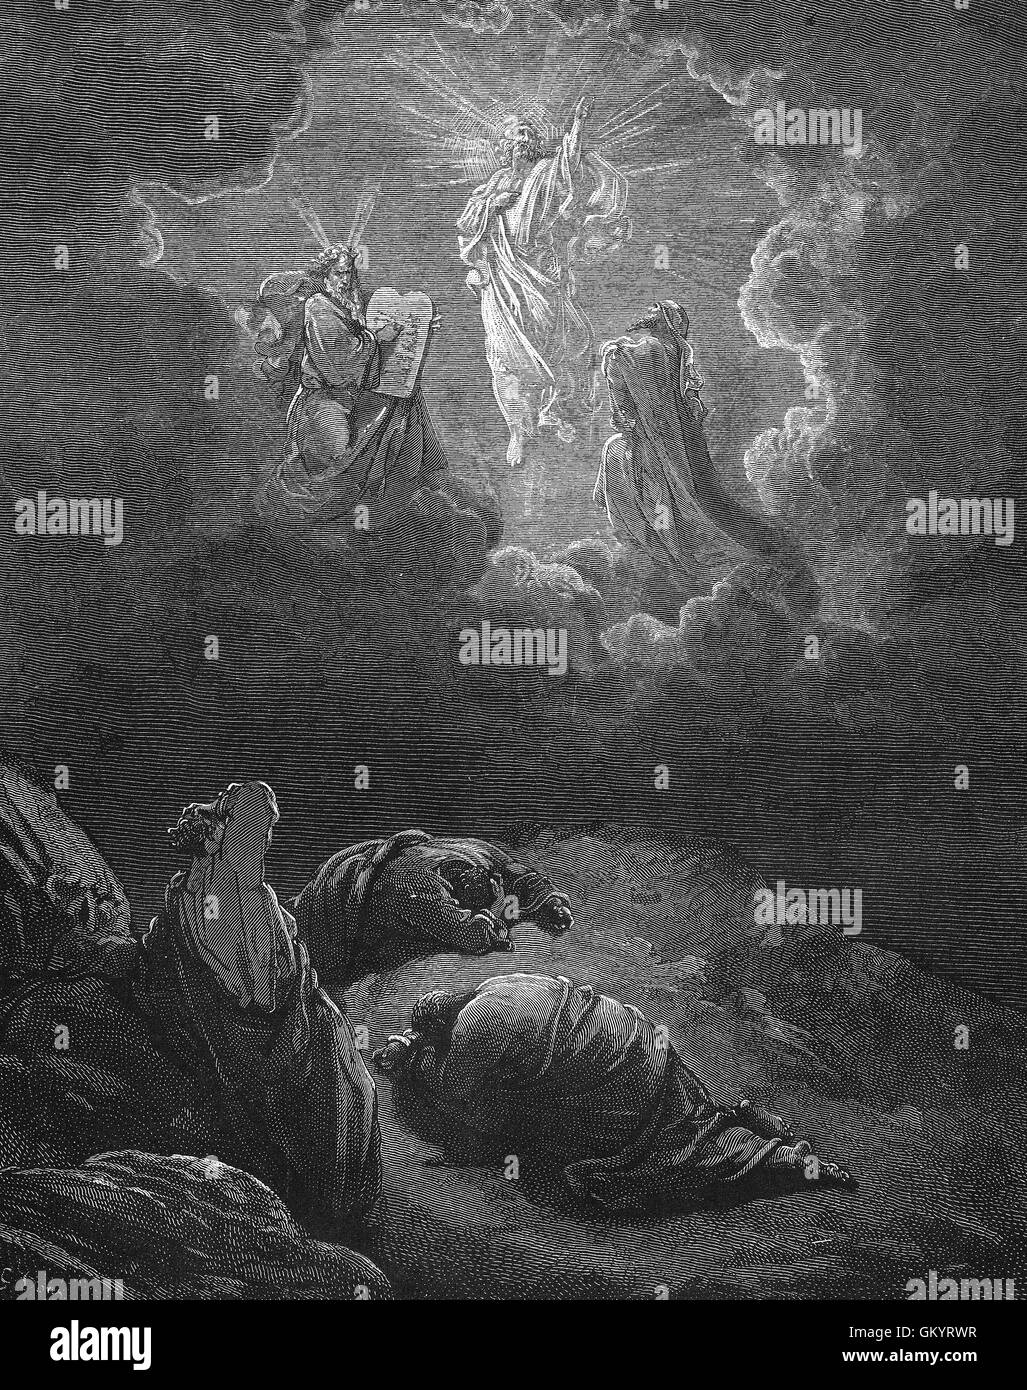 Transfiguration of christ Black and White Stock Photos & Images - Alamy